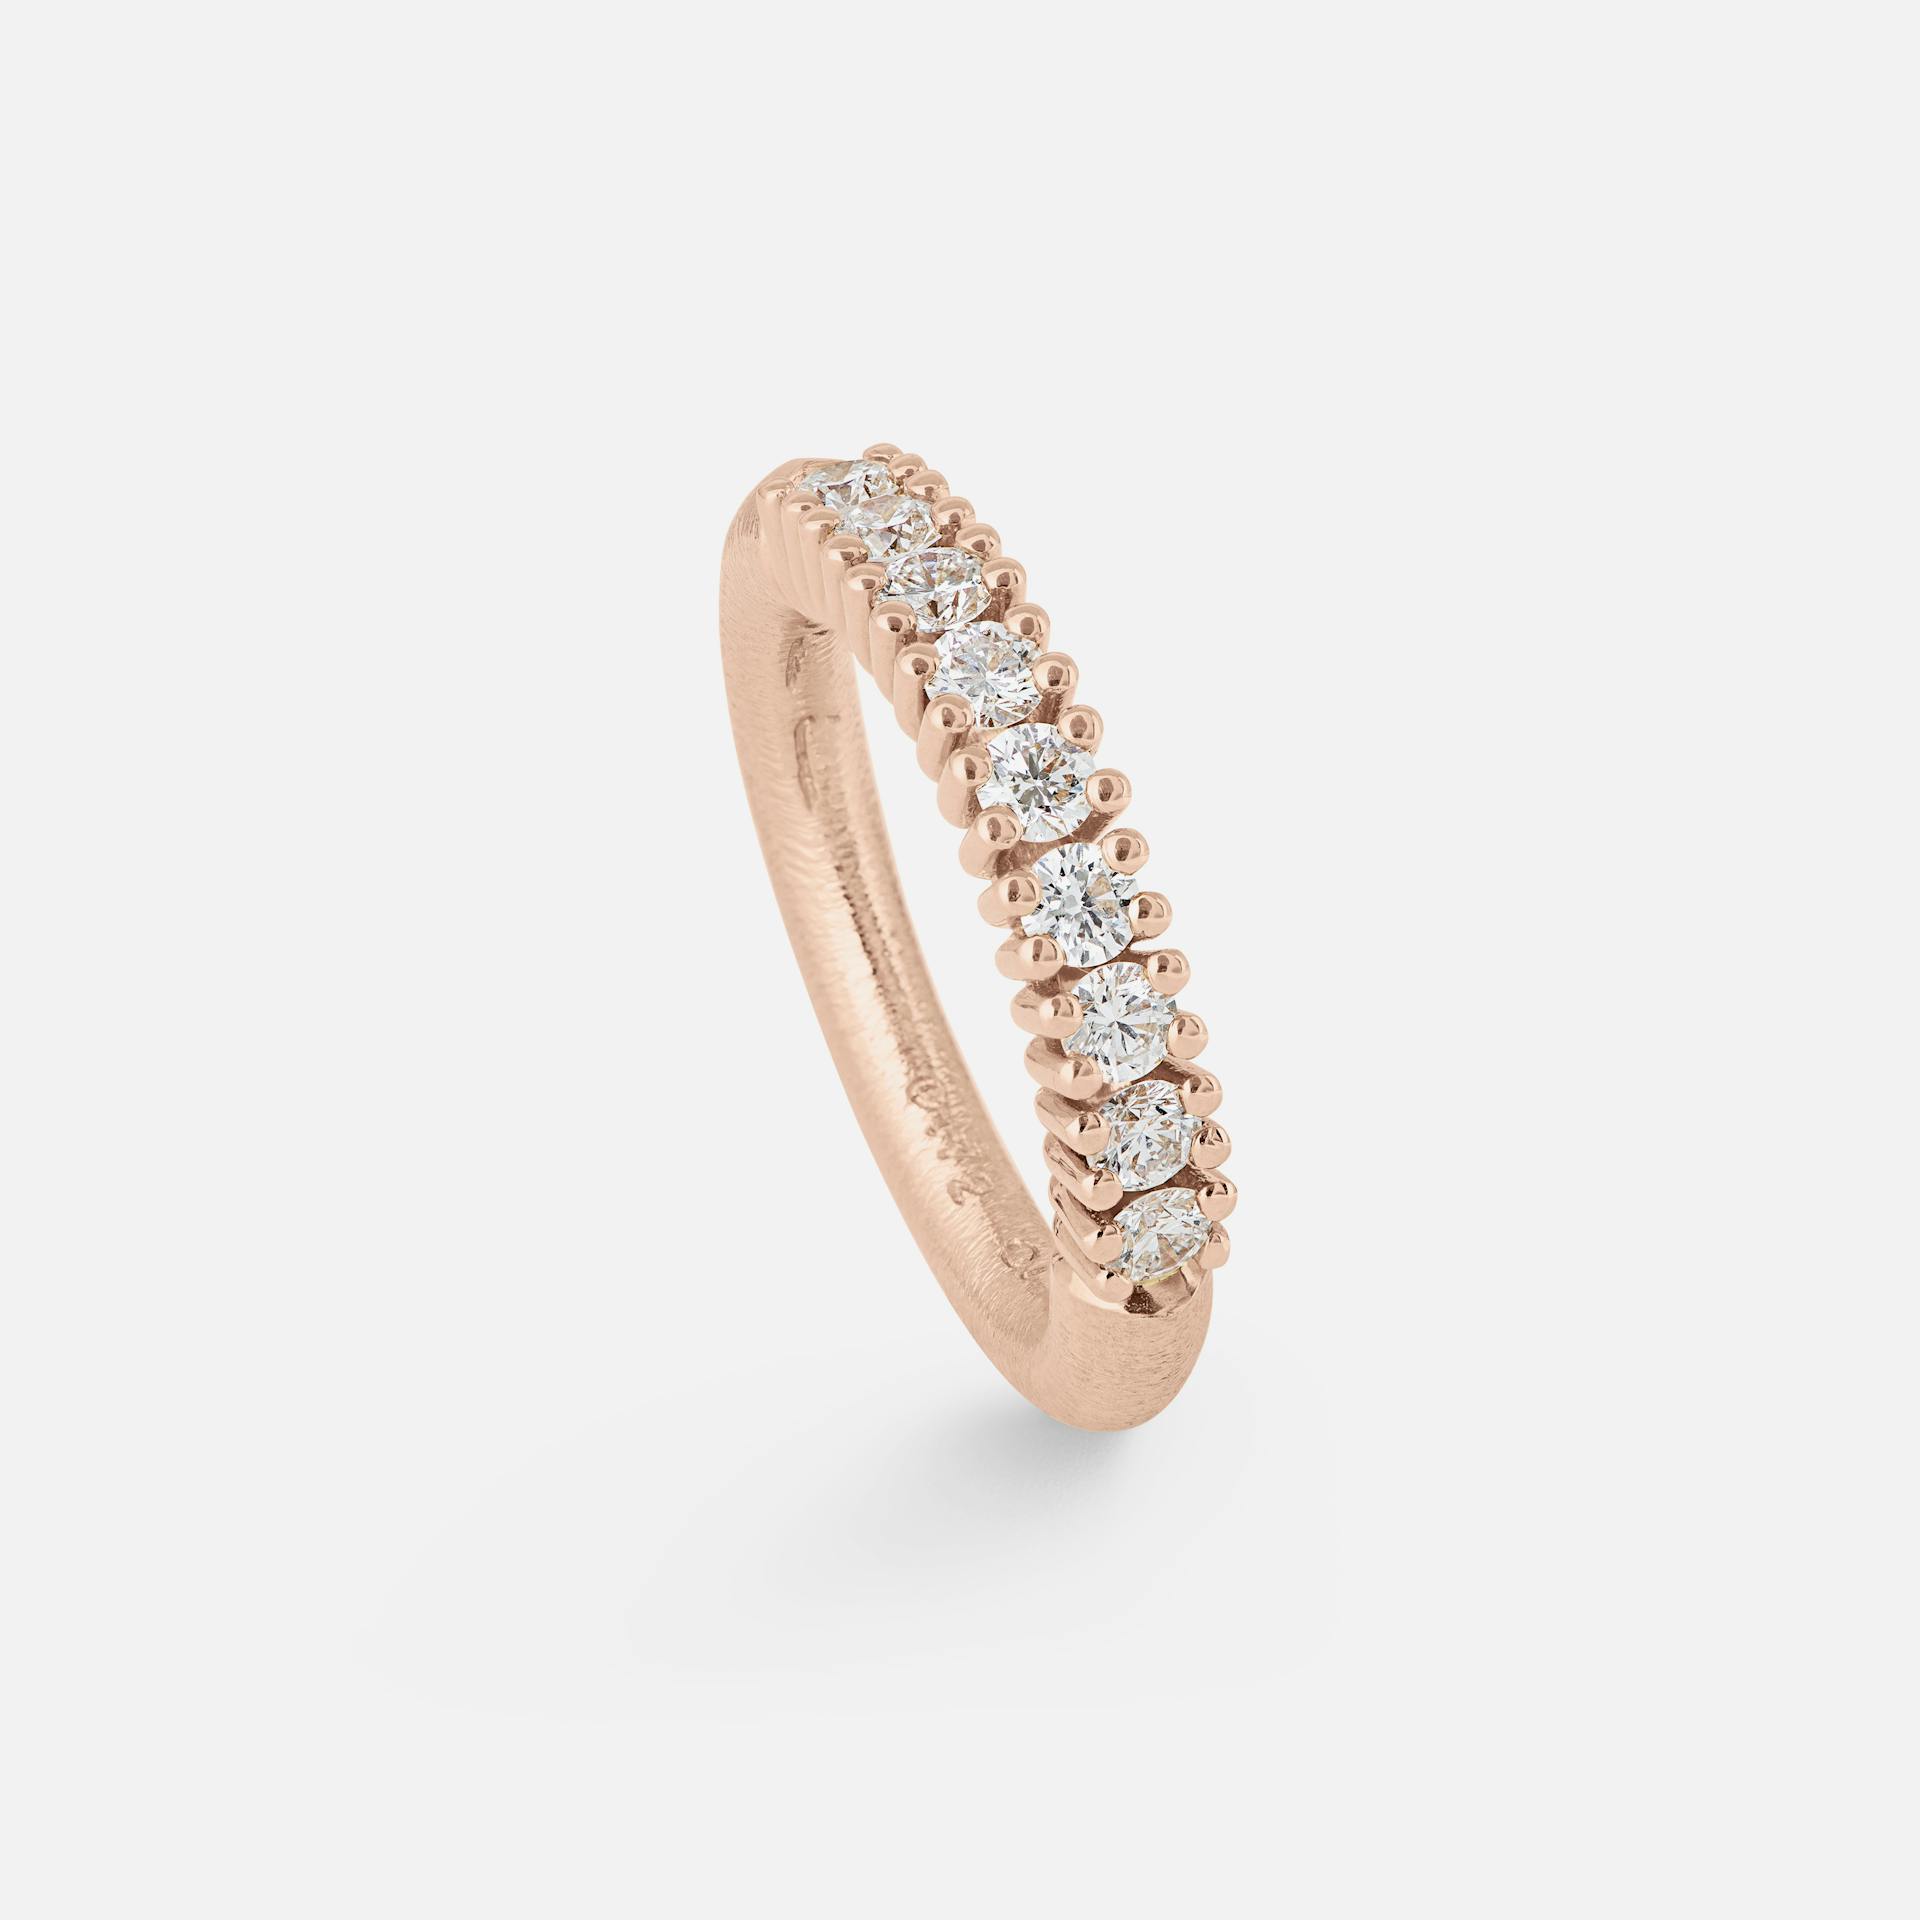 Celebration ring 18k textured rose gold with diamonds 0.72 ct. TW.VS